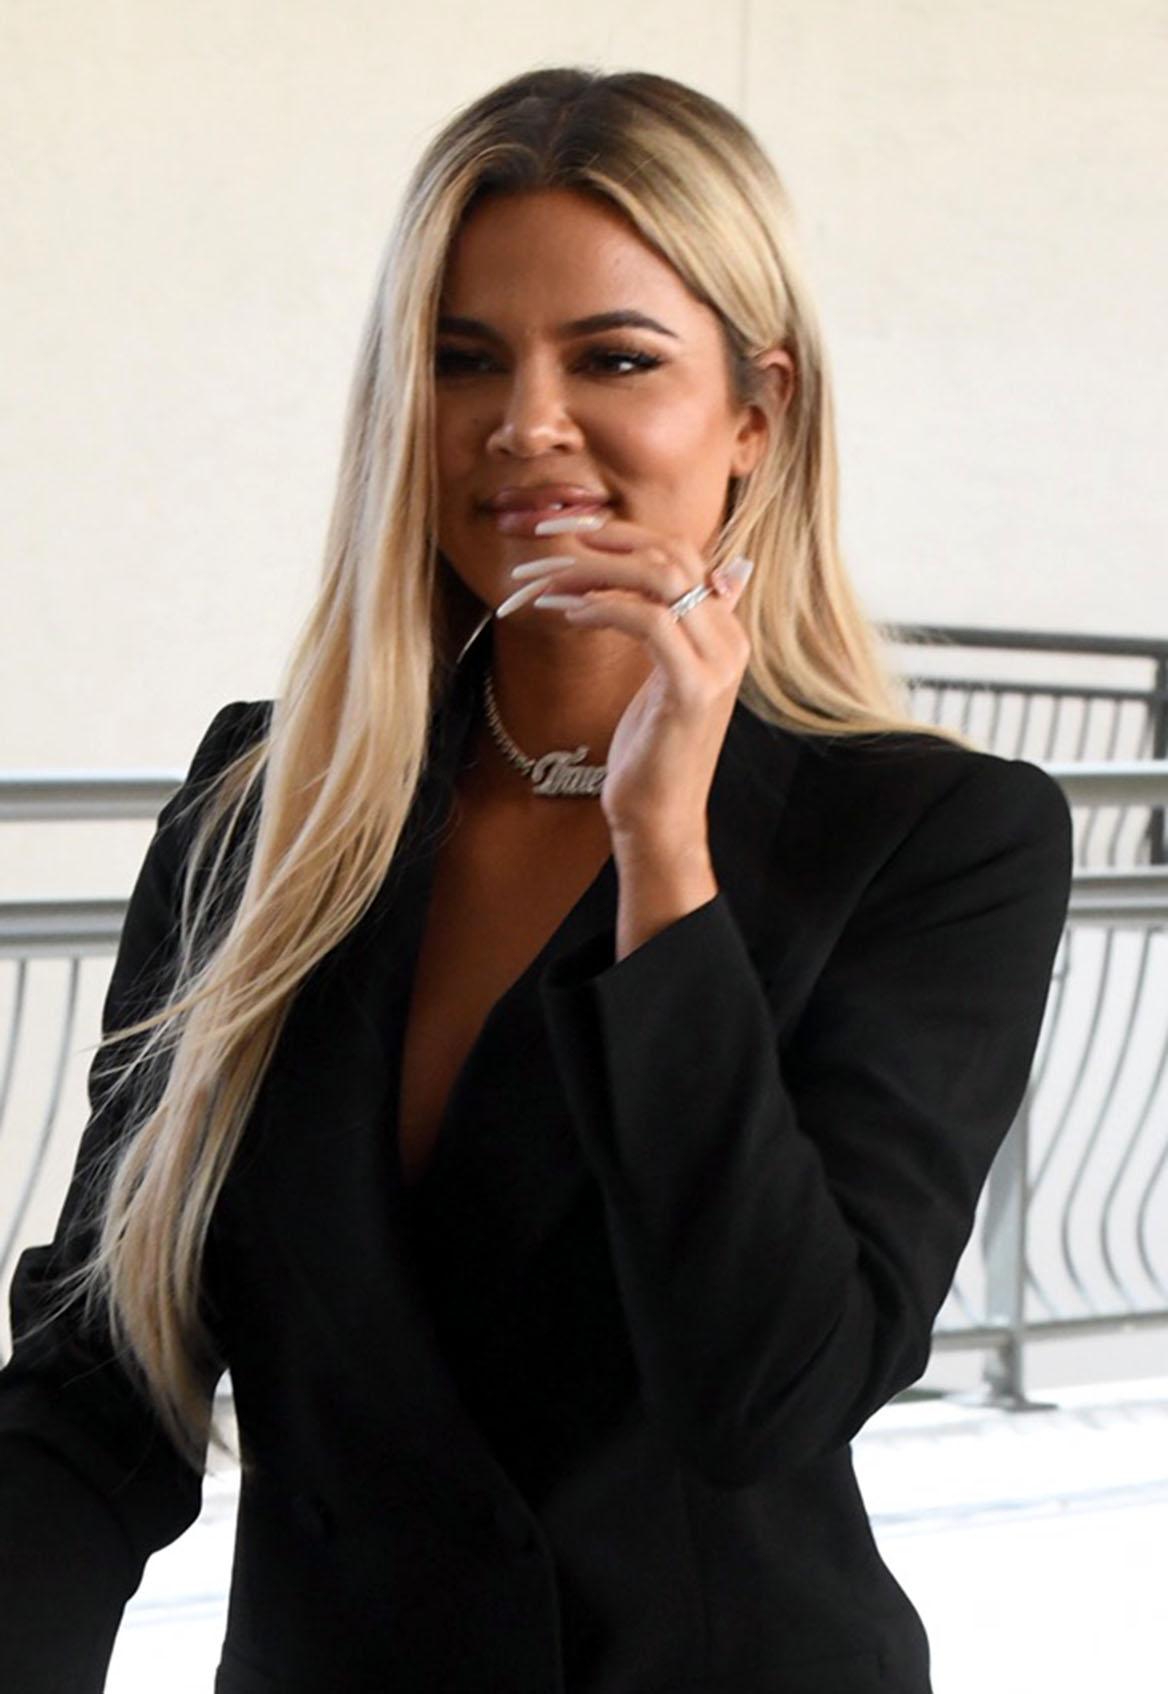 Khloe Kardashian's Migraine Issues Ploy To Sell Medication?!